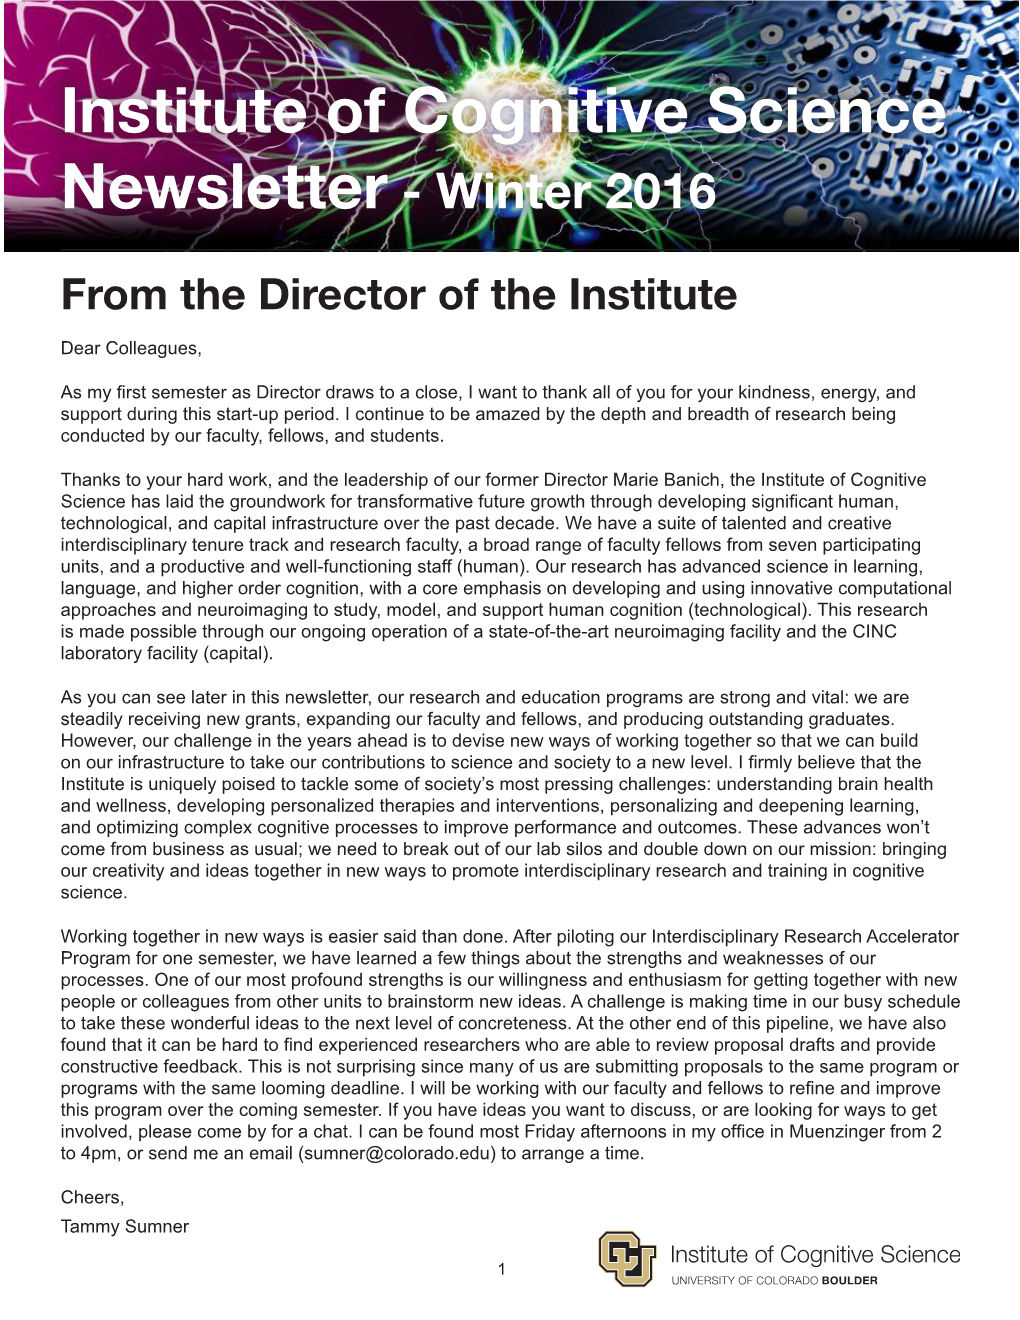 Institute of Cognitive Science Newsletter - Winter 2016